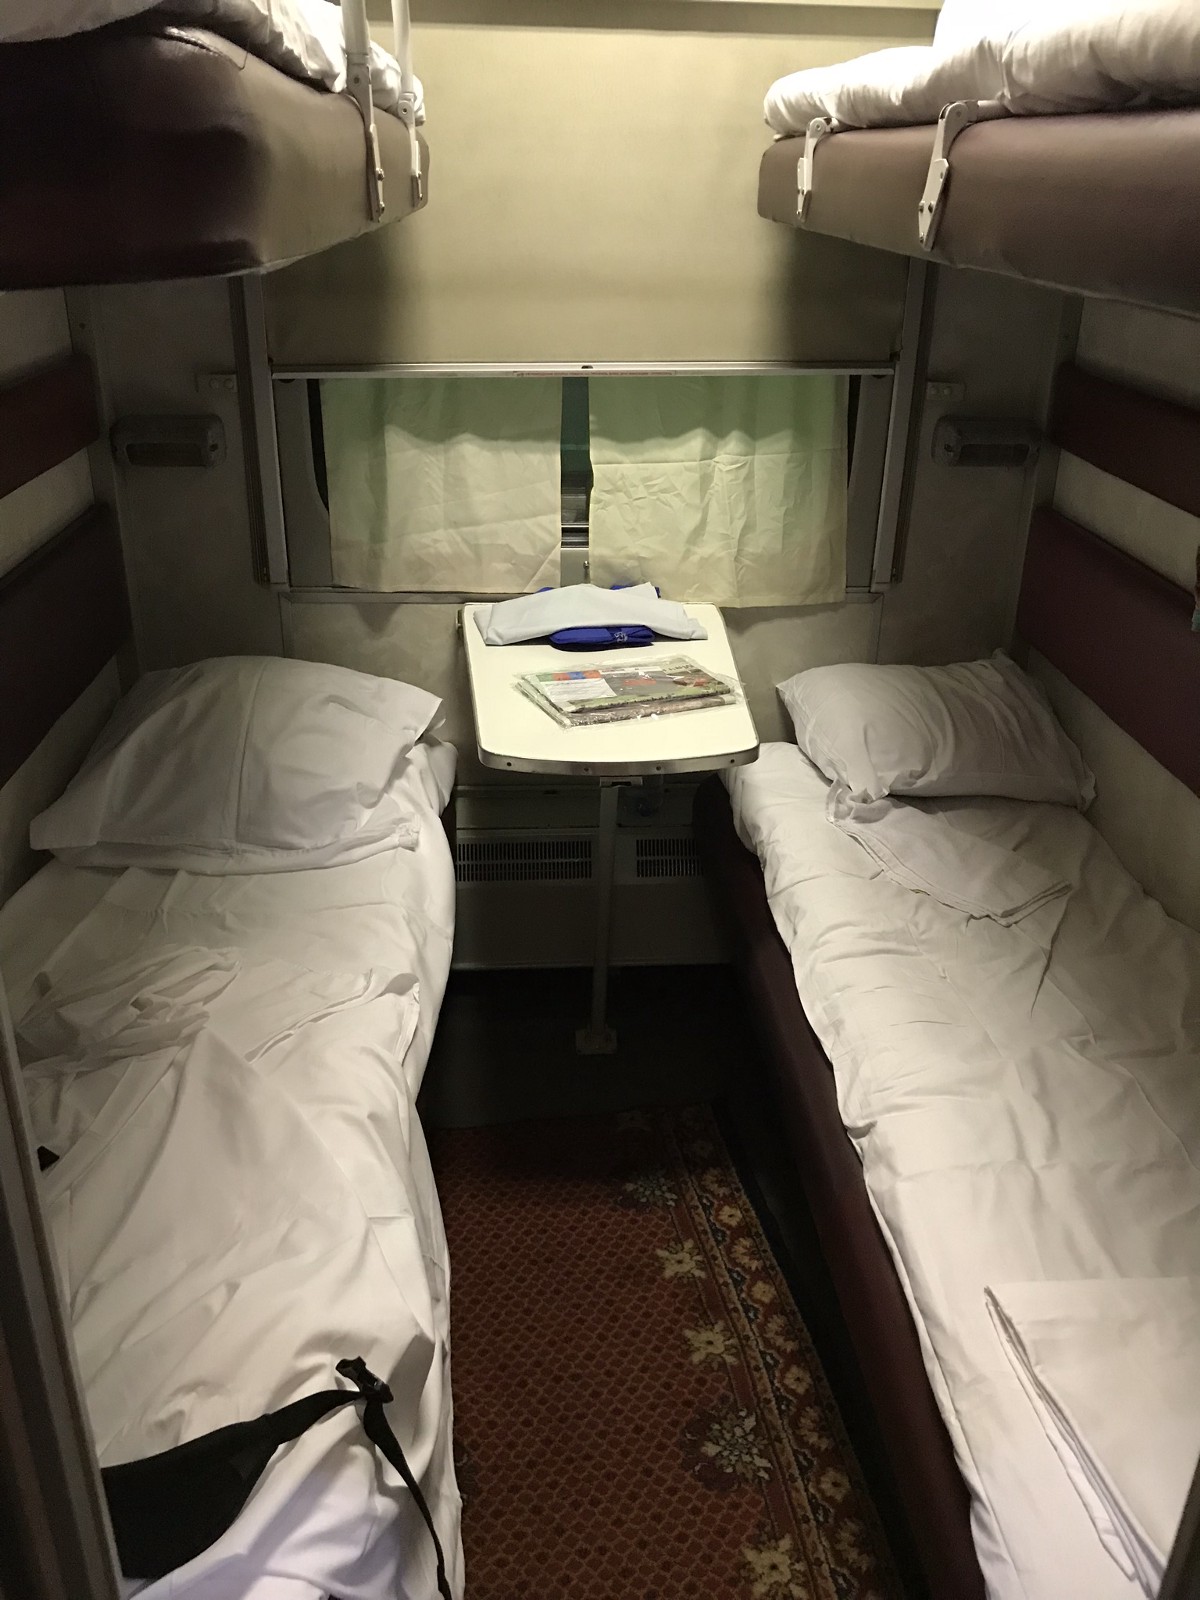 Typical four-person cabin in the second-class car.